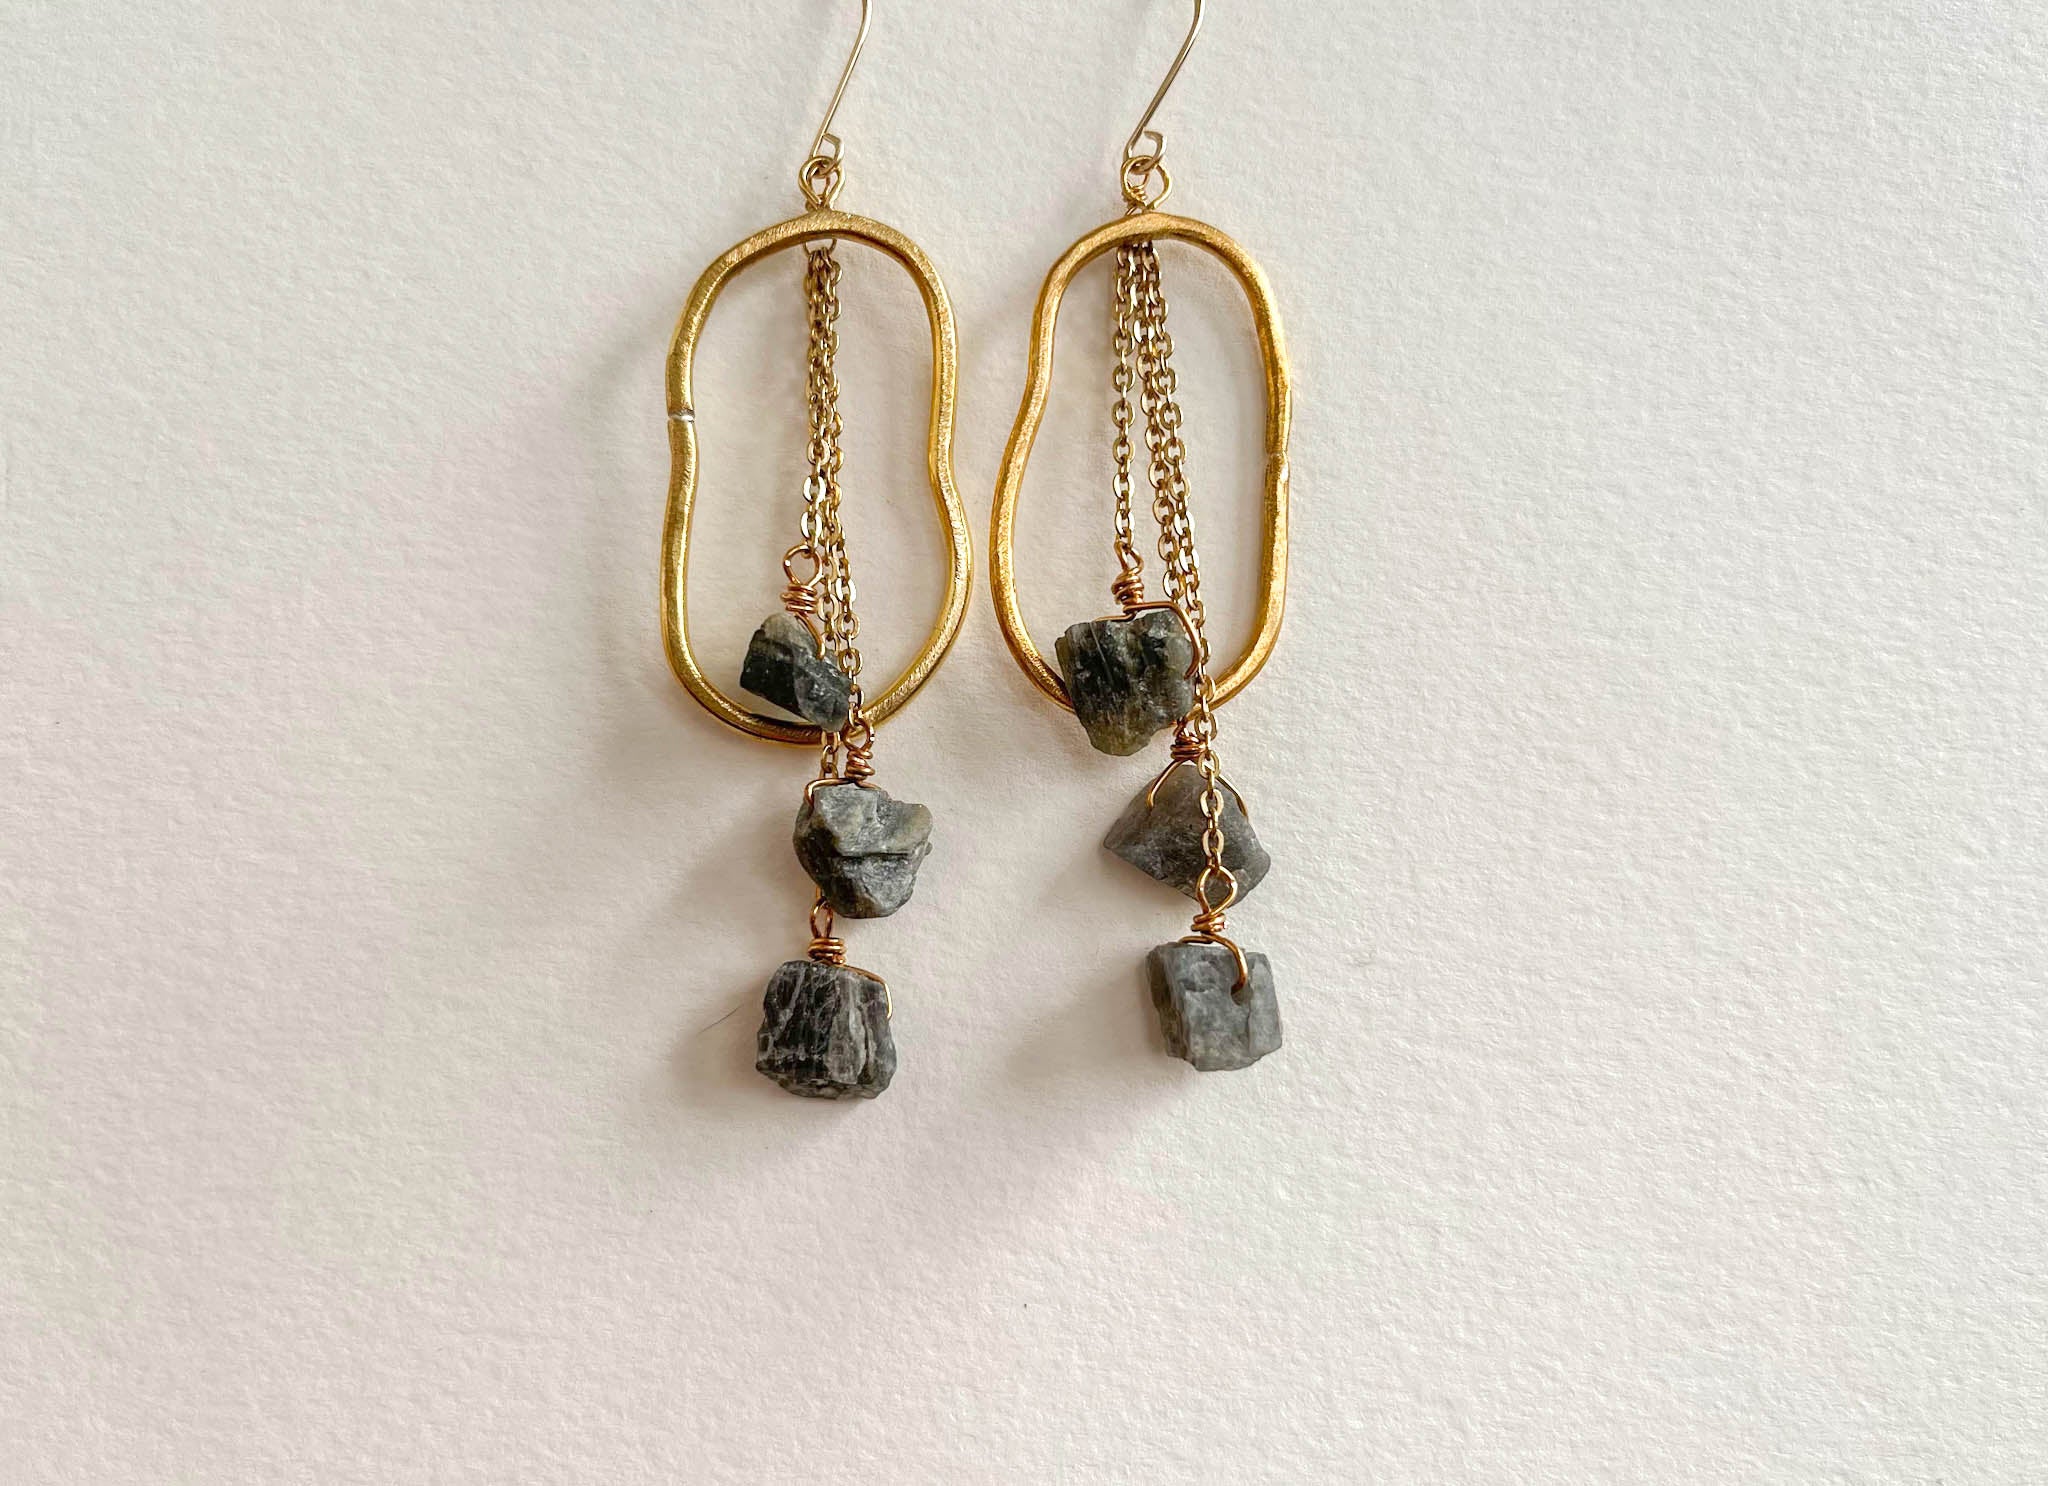 FreeForm Earrings With Dripping Labradorite